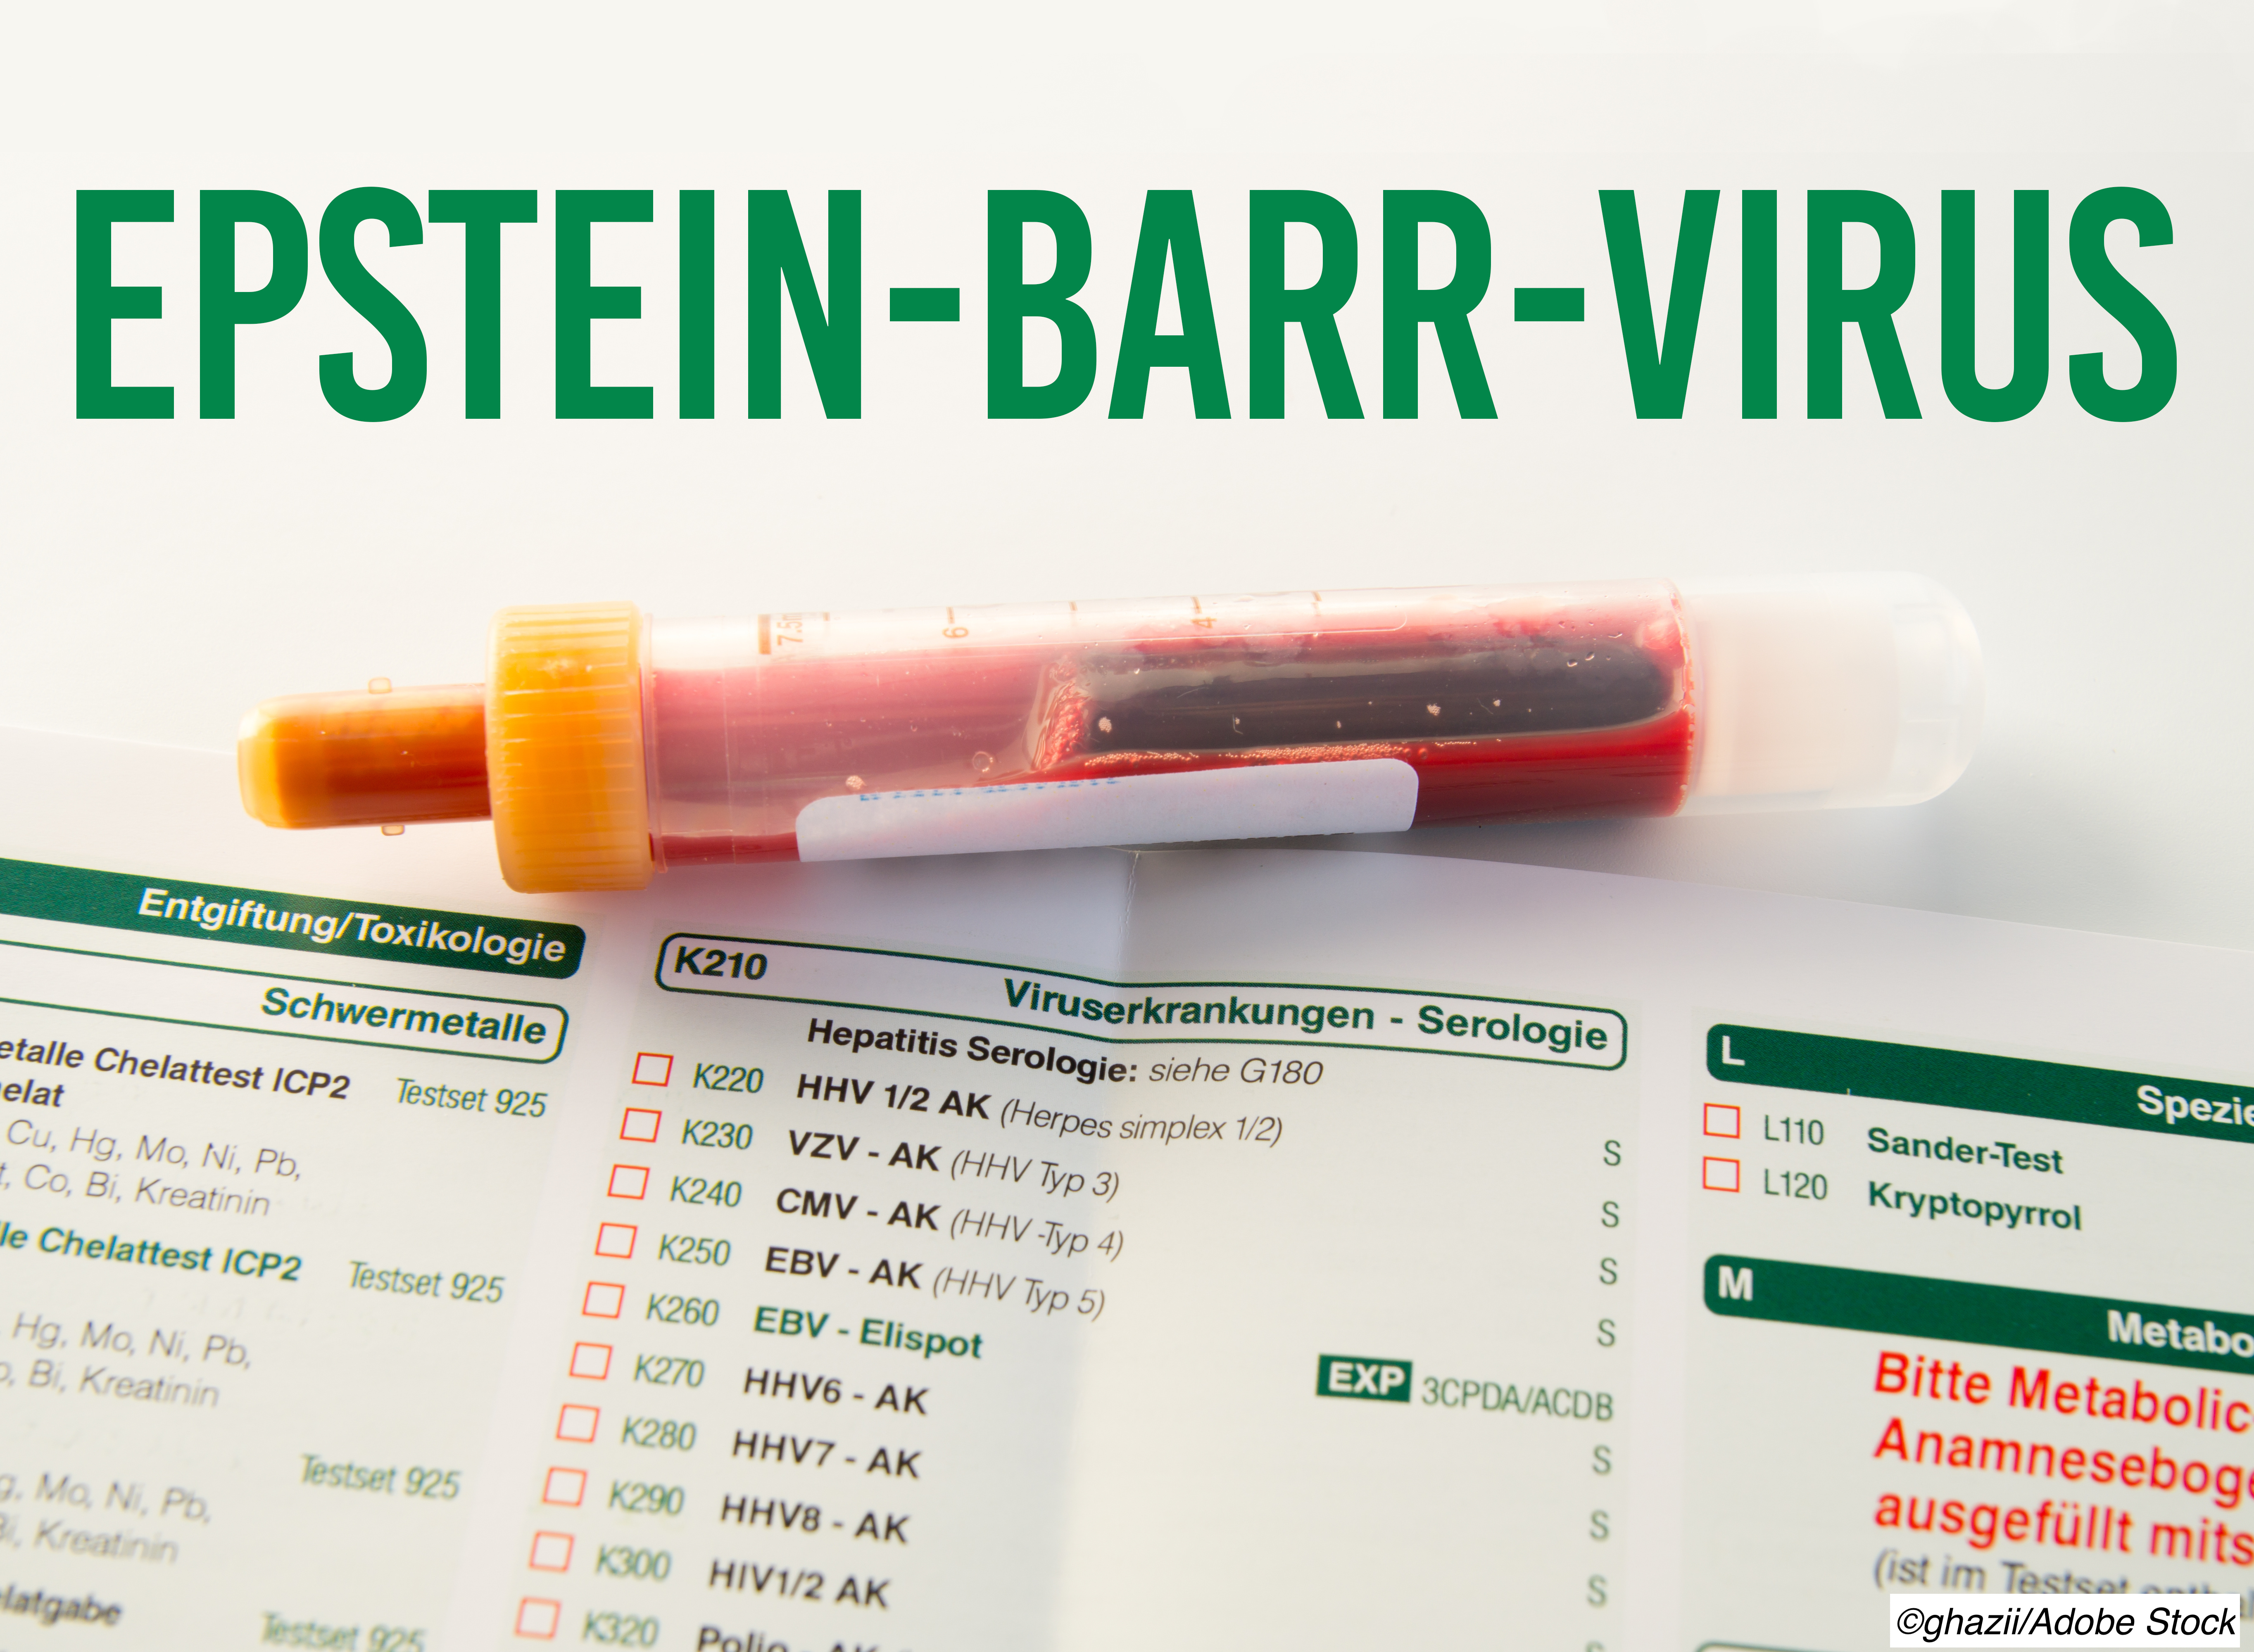 More Evidence Points to Epstein-Barr Virus as MS Trigger